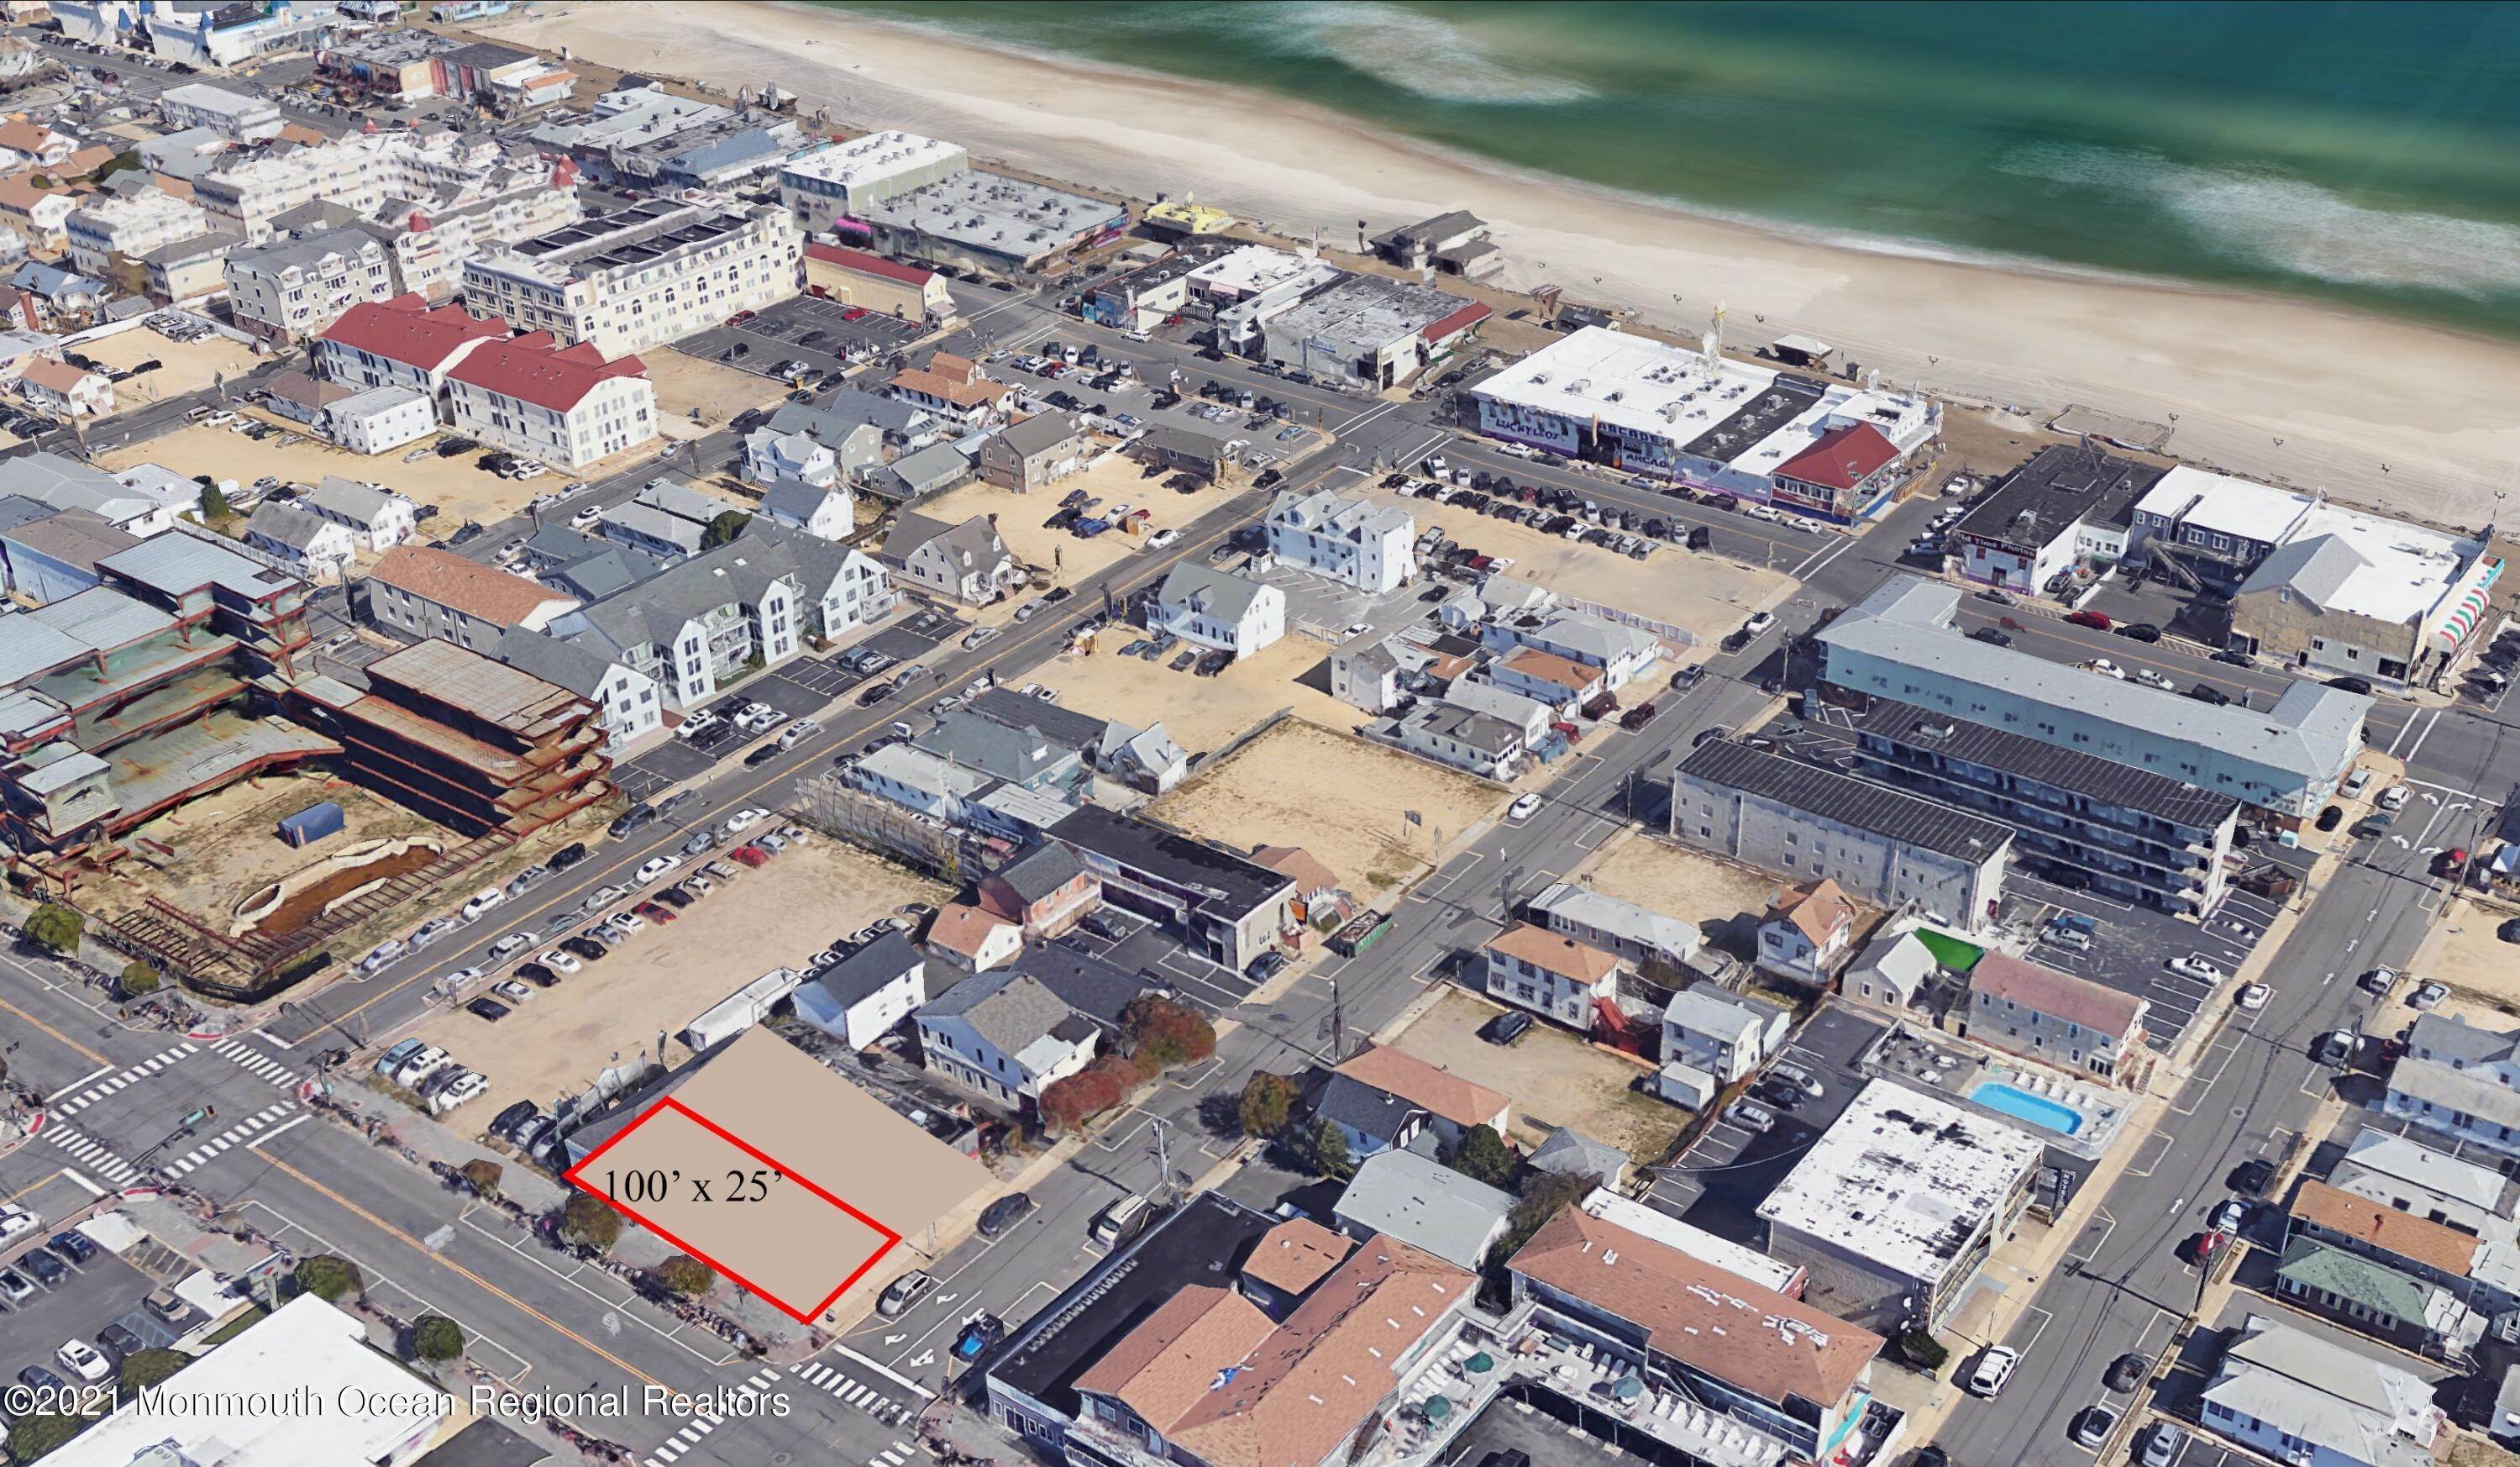 Property for Sale at 300 Boulevard Seaside Heights, New Jersey 08751 United States